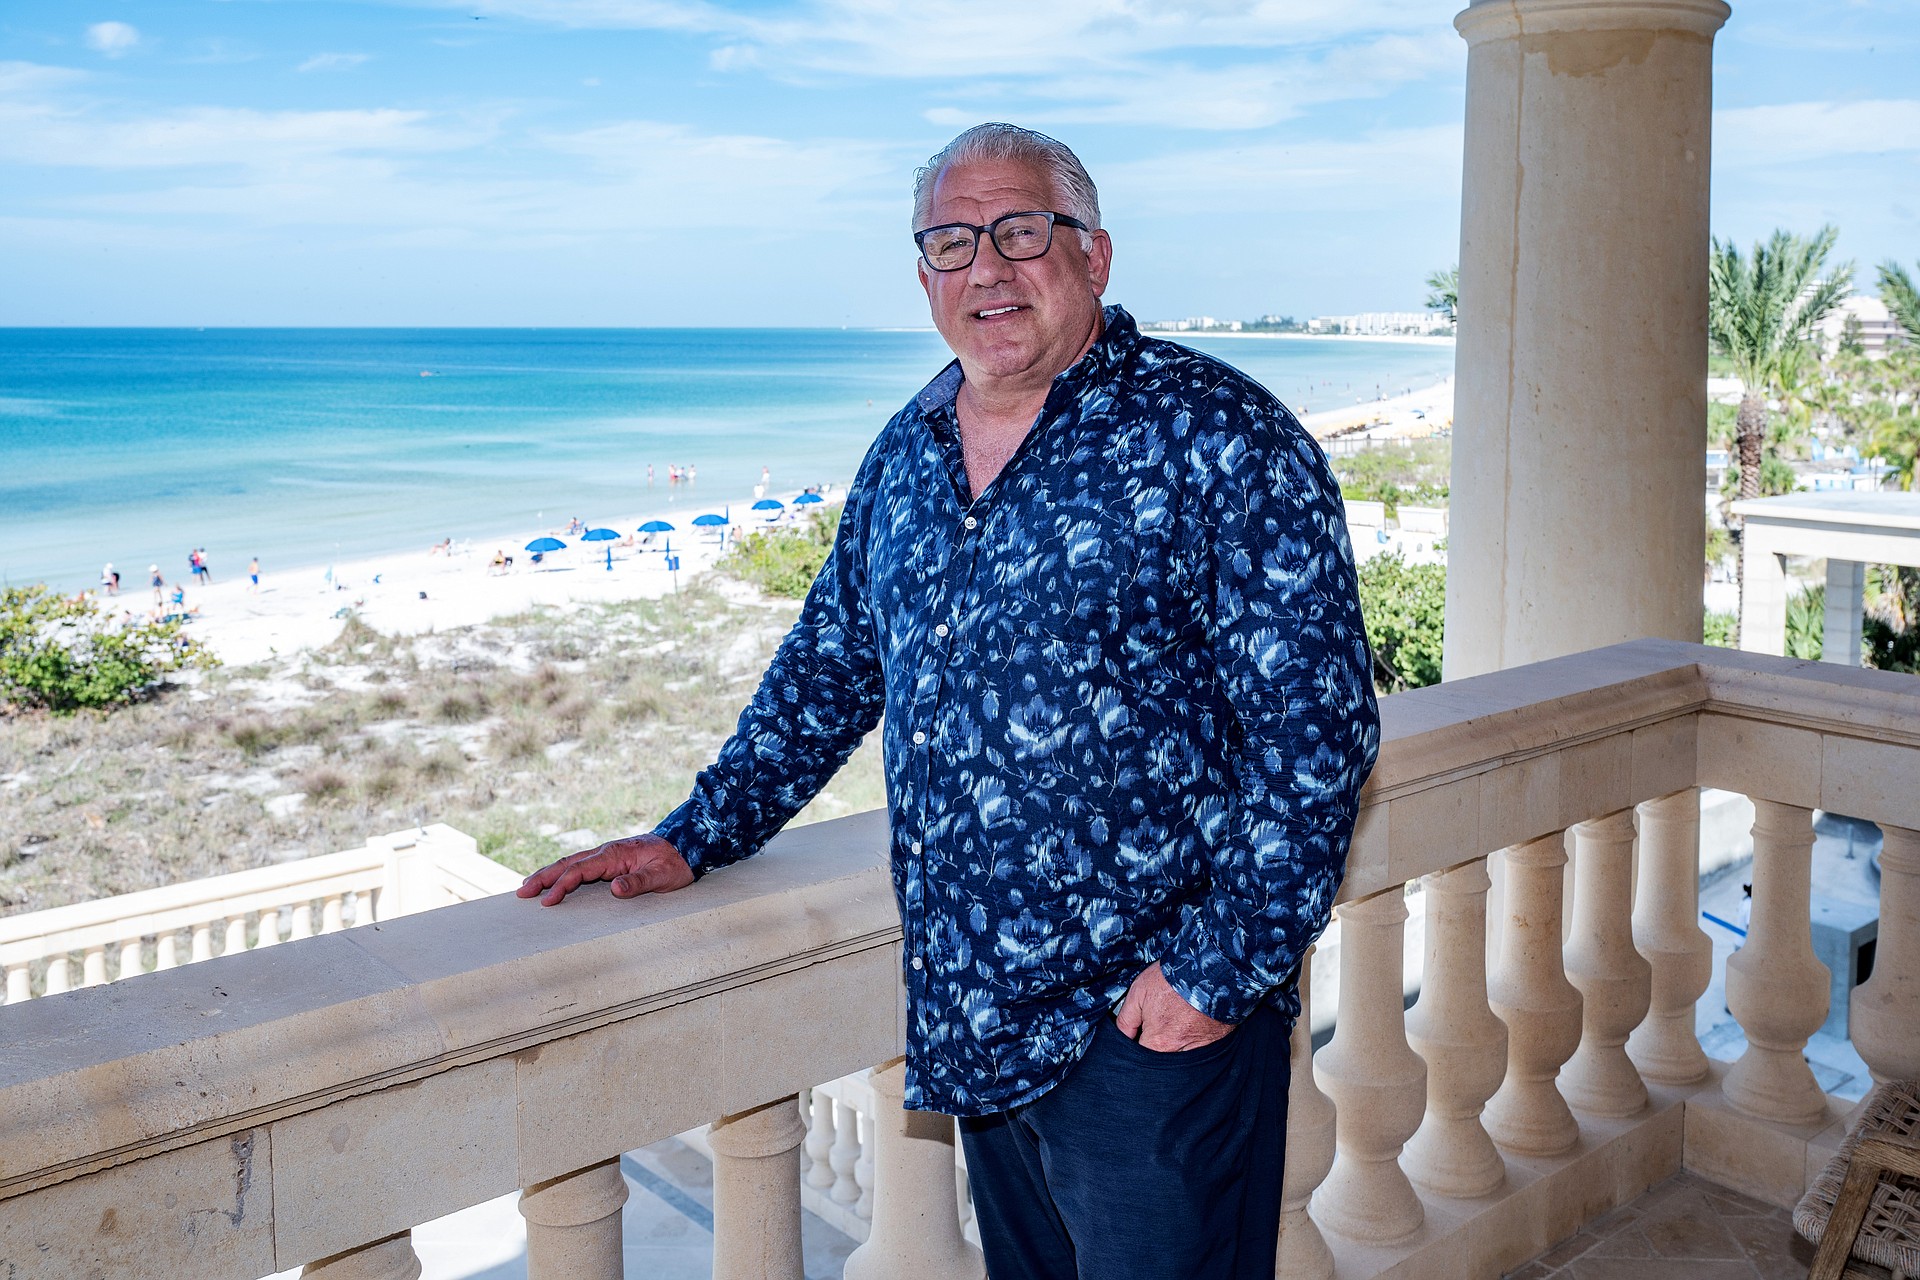 Gary Kompothecras and his family live in one of the largest houses on Siesta Key — a three-story, 13,560-square-foot estate on Point of Rocks Road.